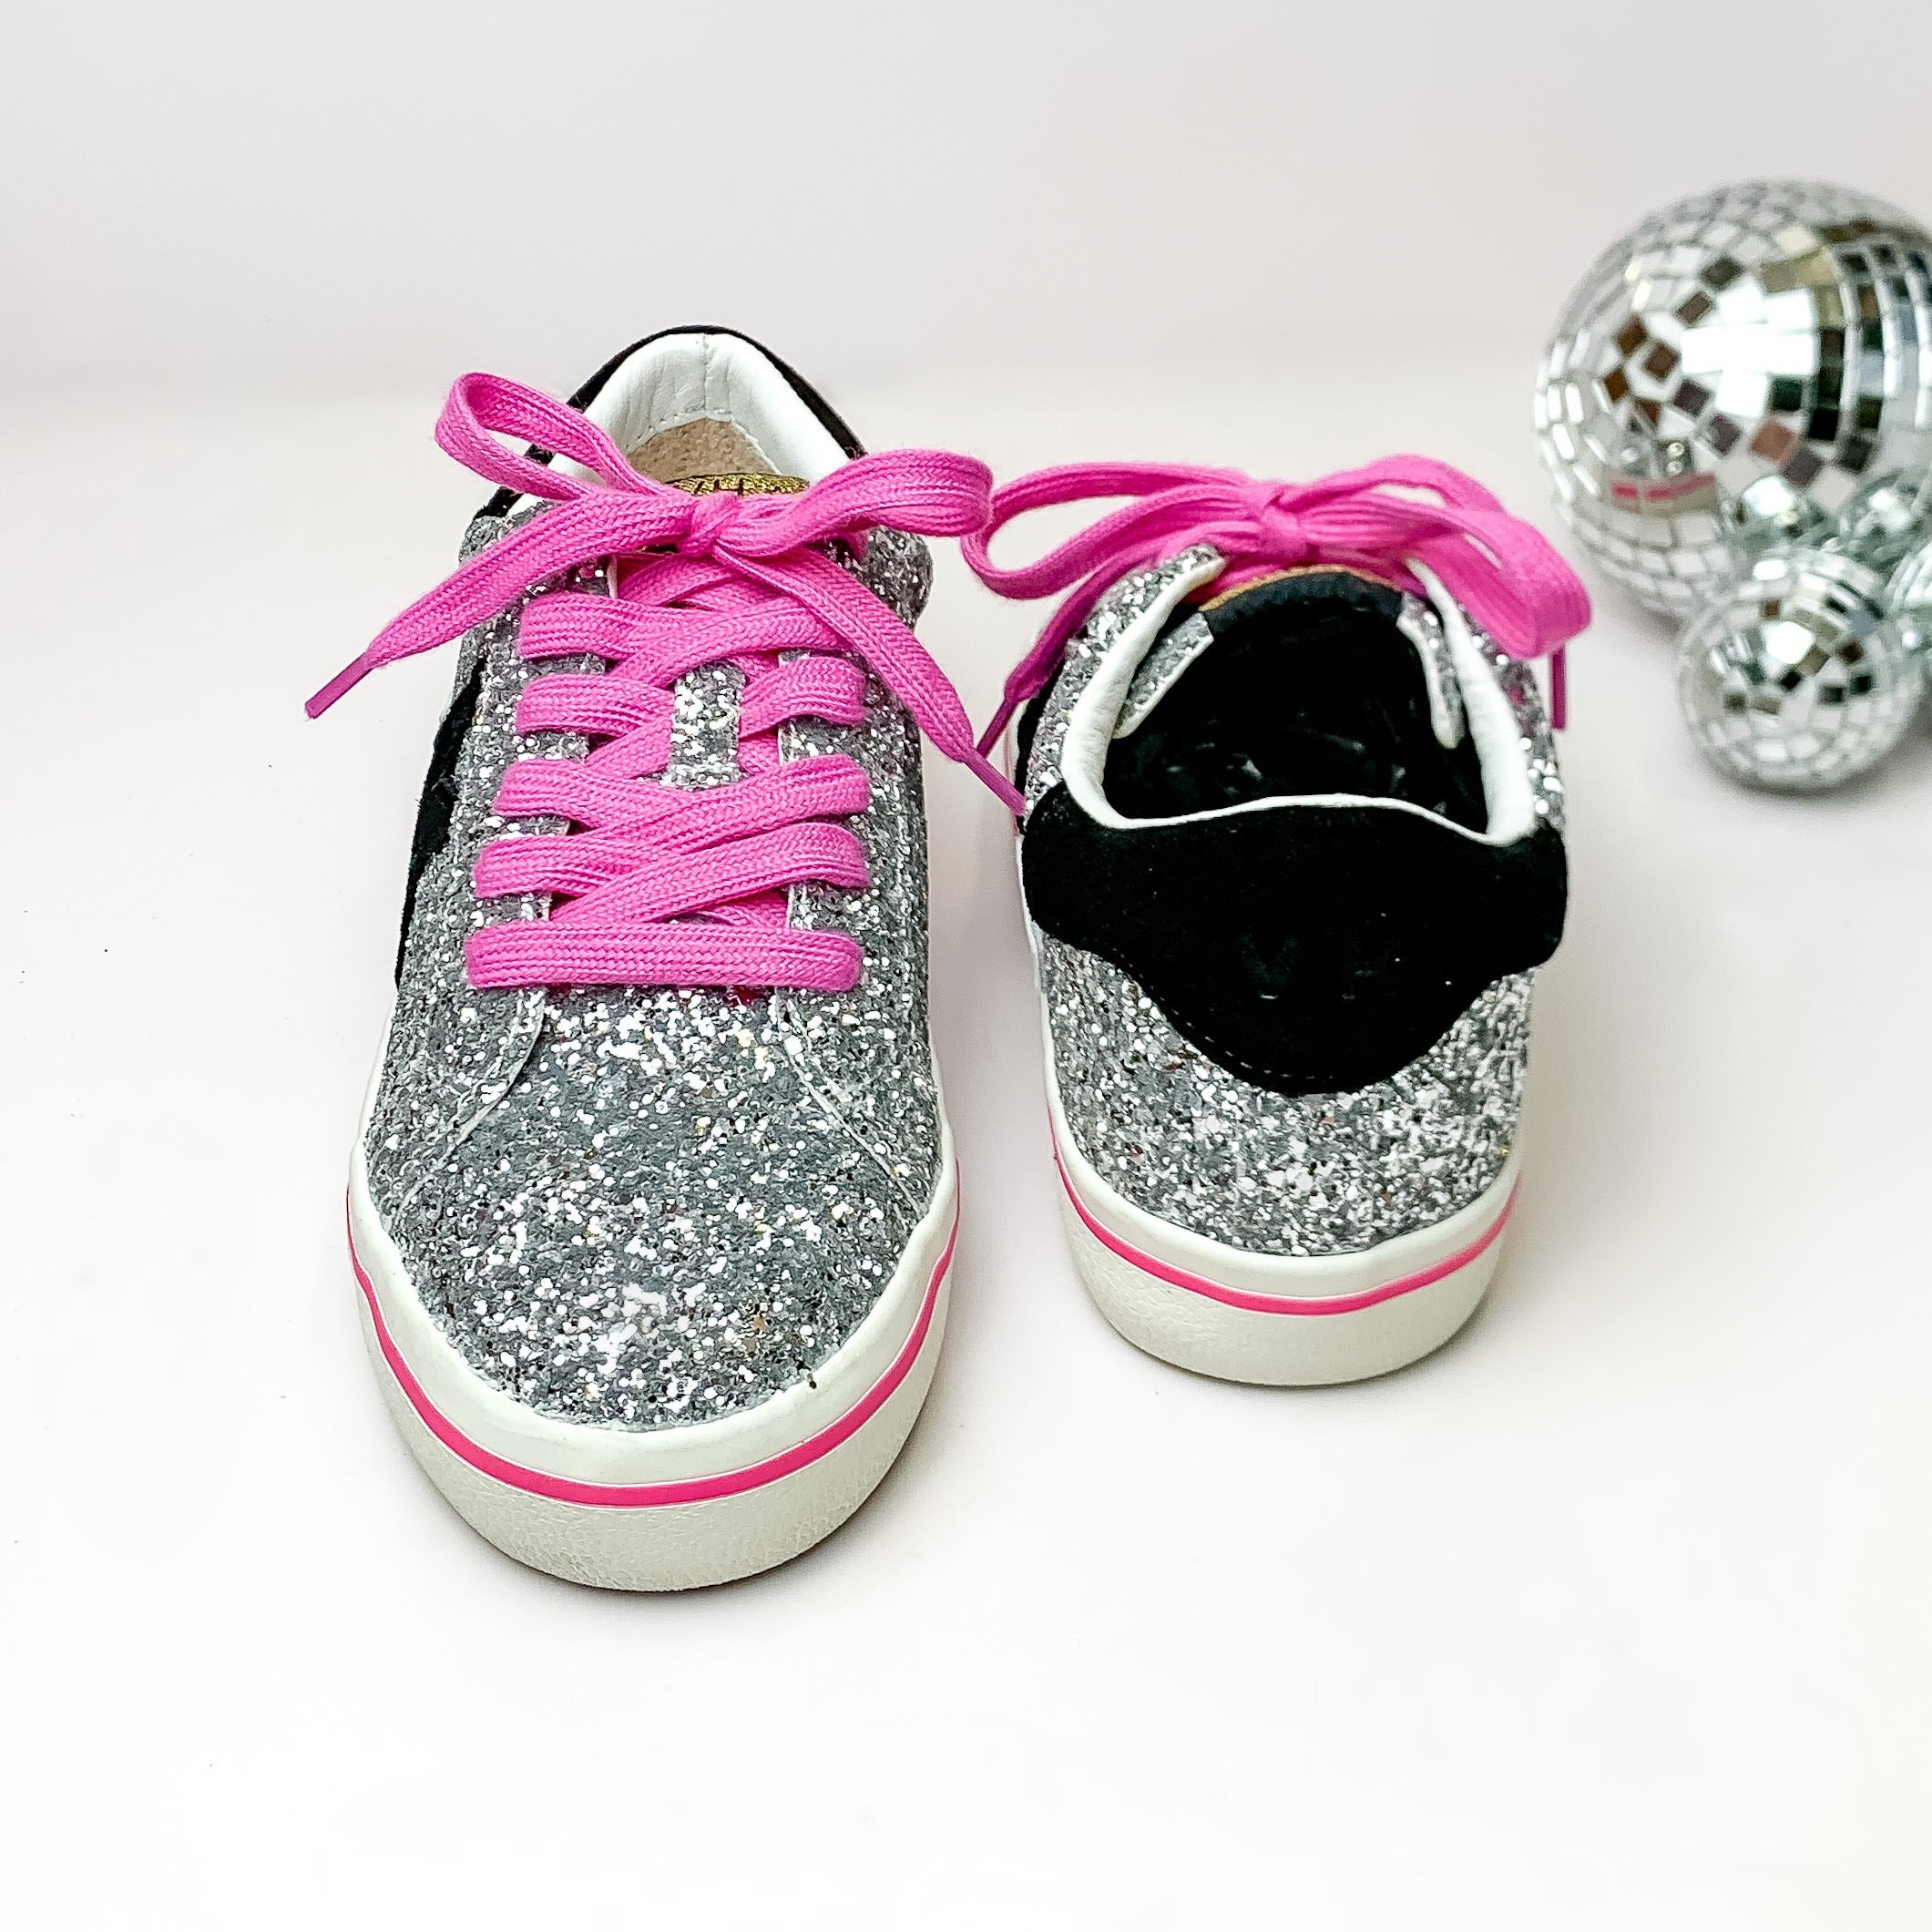 Vintage Havana | Flair 6 Sneakers in Silver Glitter Multi - Giddy Up Glamour Boutique